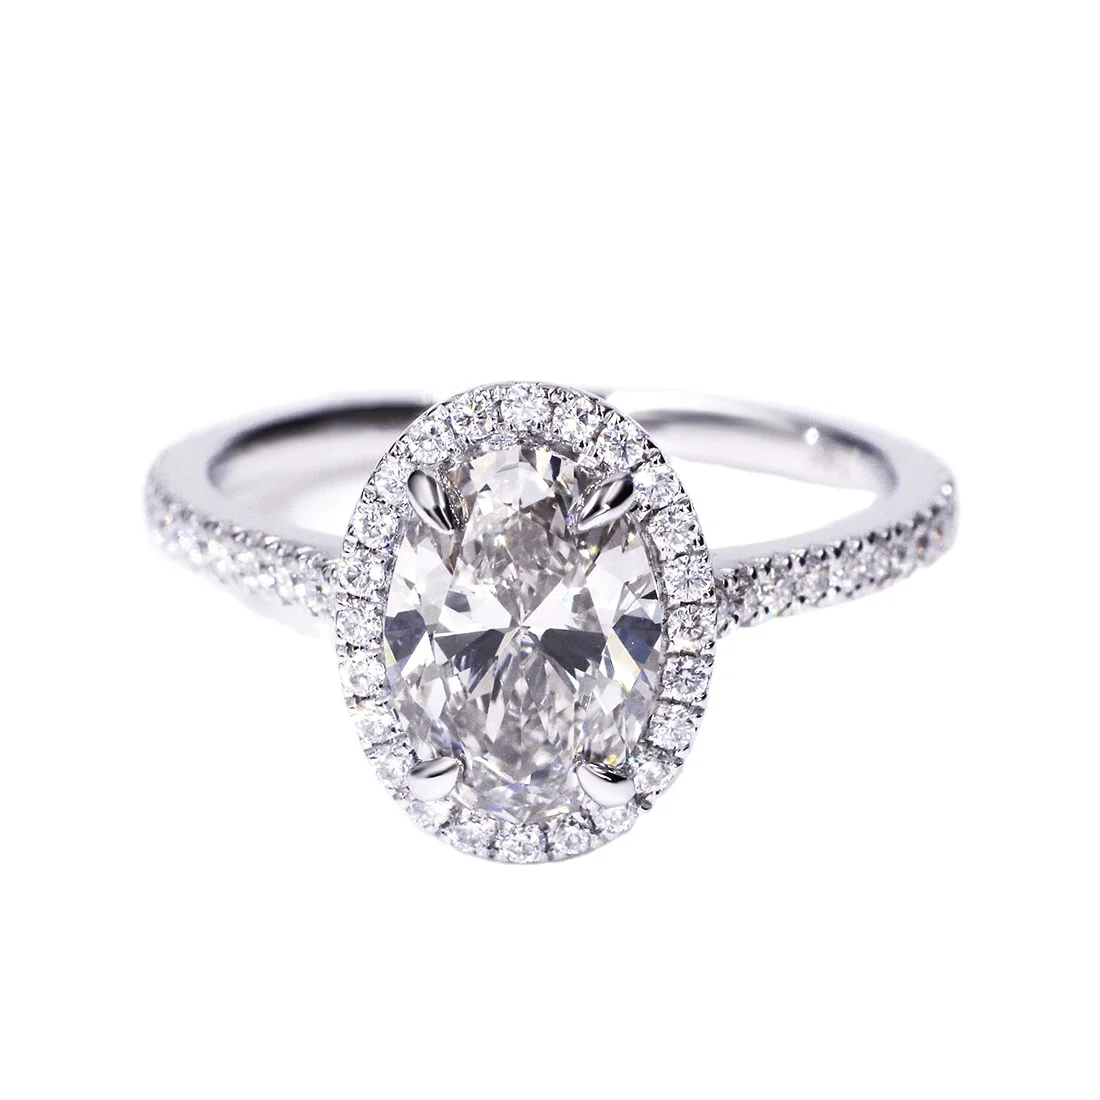 

Tianyu Jewelry Promotion Price 14K Solid White Gold 1.57ct IGI Oval Cut CVD Lab Grown Diamond Engagement Ring